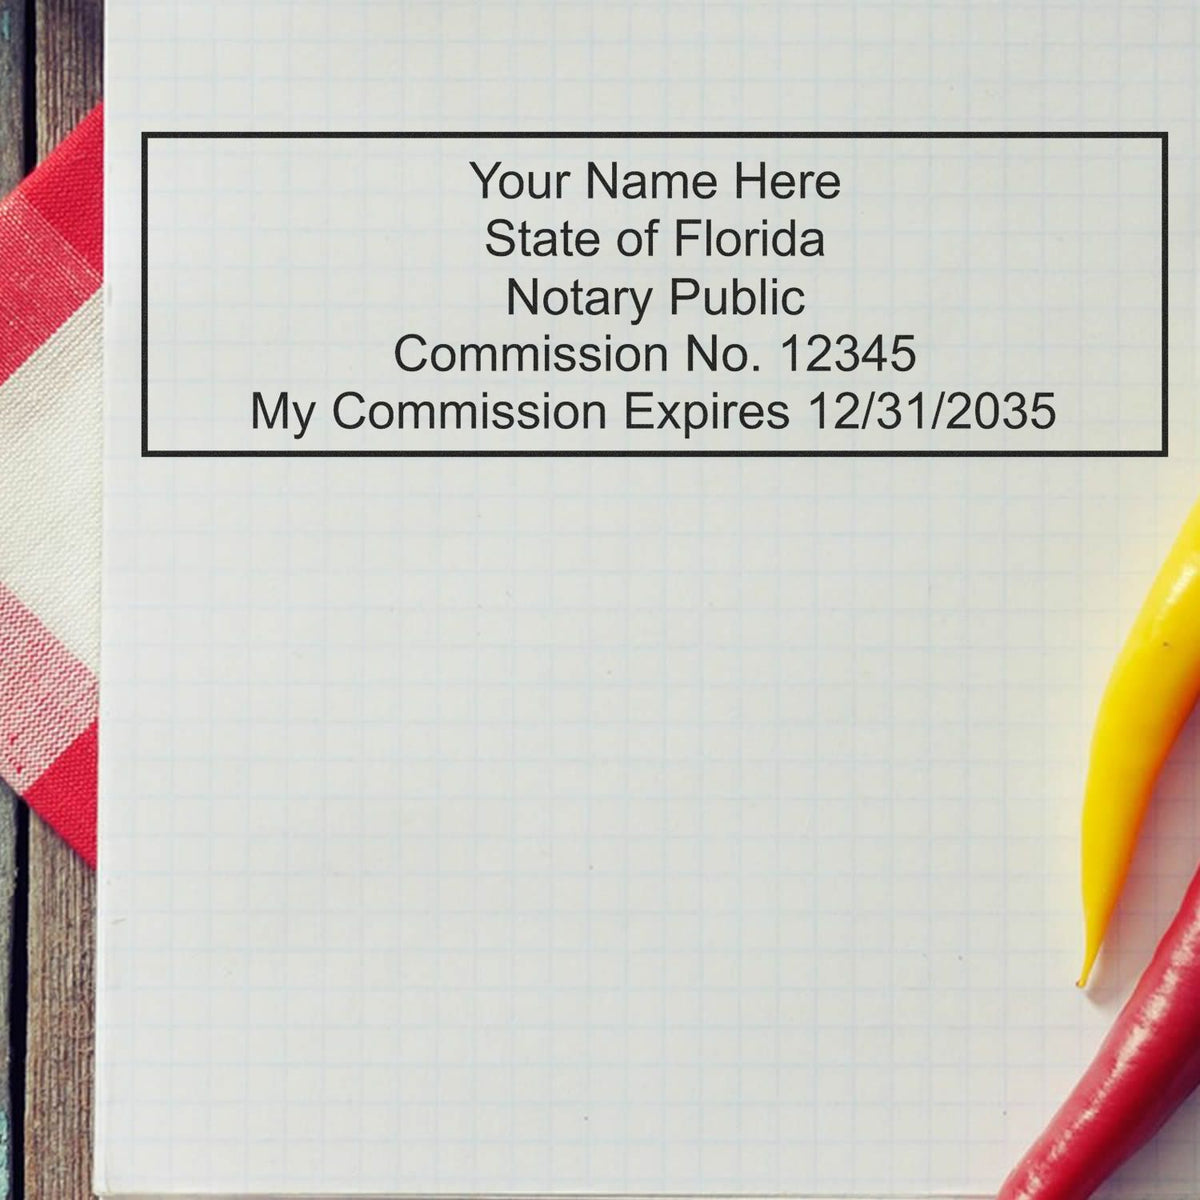 The Self-Inking Rectangular Florida Notary Stamp stamp impression comes to life with a crisp, detailed photo on paper - showcasing true professional quality.